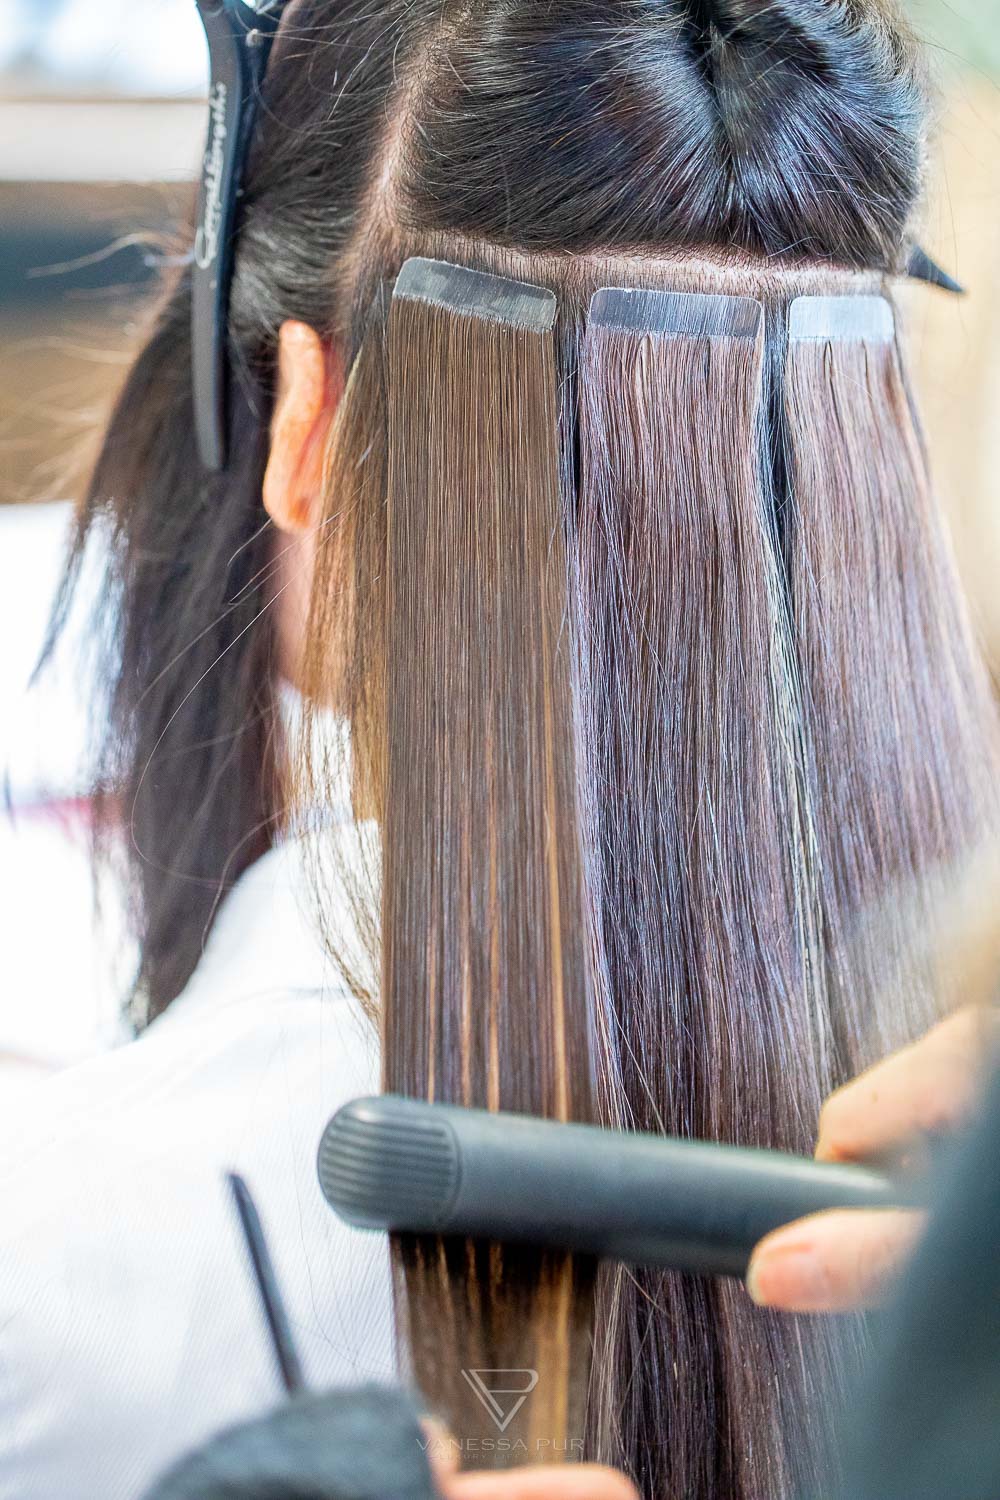 Why I wear tape extensions - Advantages - Best hairdresser for tape extensions? Advantages of tape extensions? Is it possible to mix colors? How are tapes used? Tape extensions FAQ and frequently asked questions